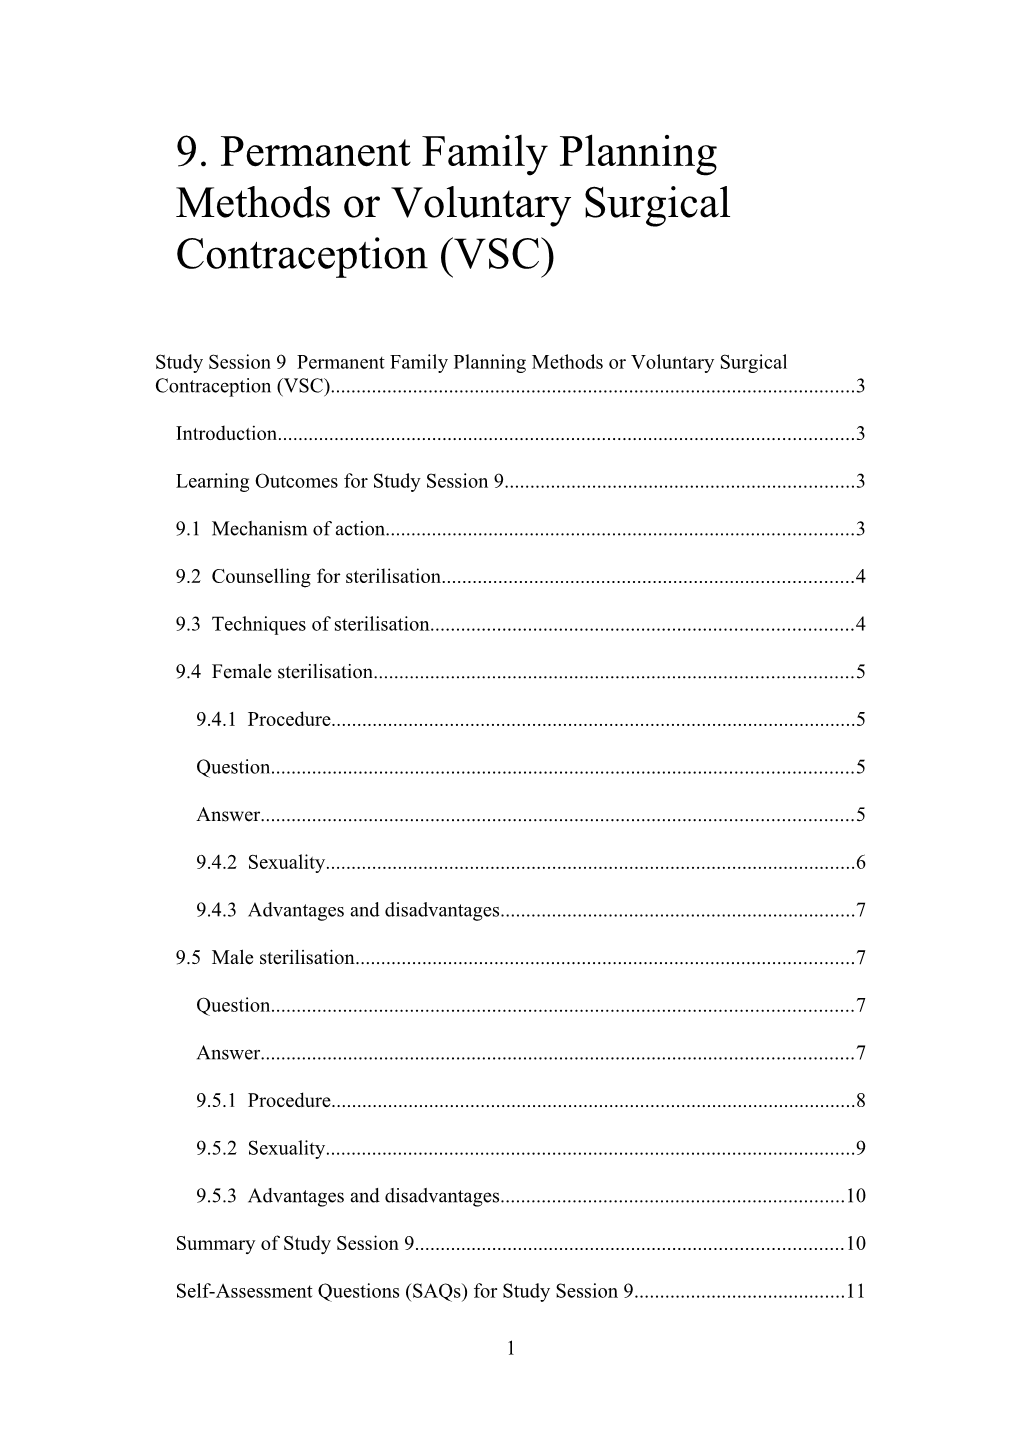 9. Permanent Family Planning Methods Or Voluntary Surgical Contraception (VSC)